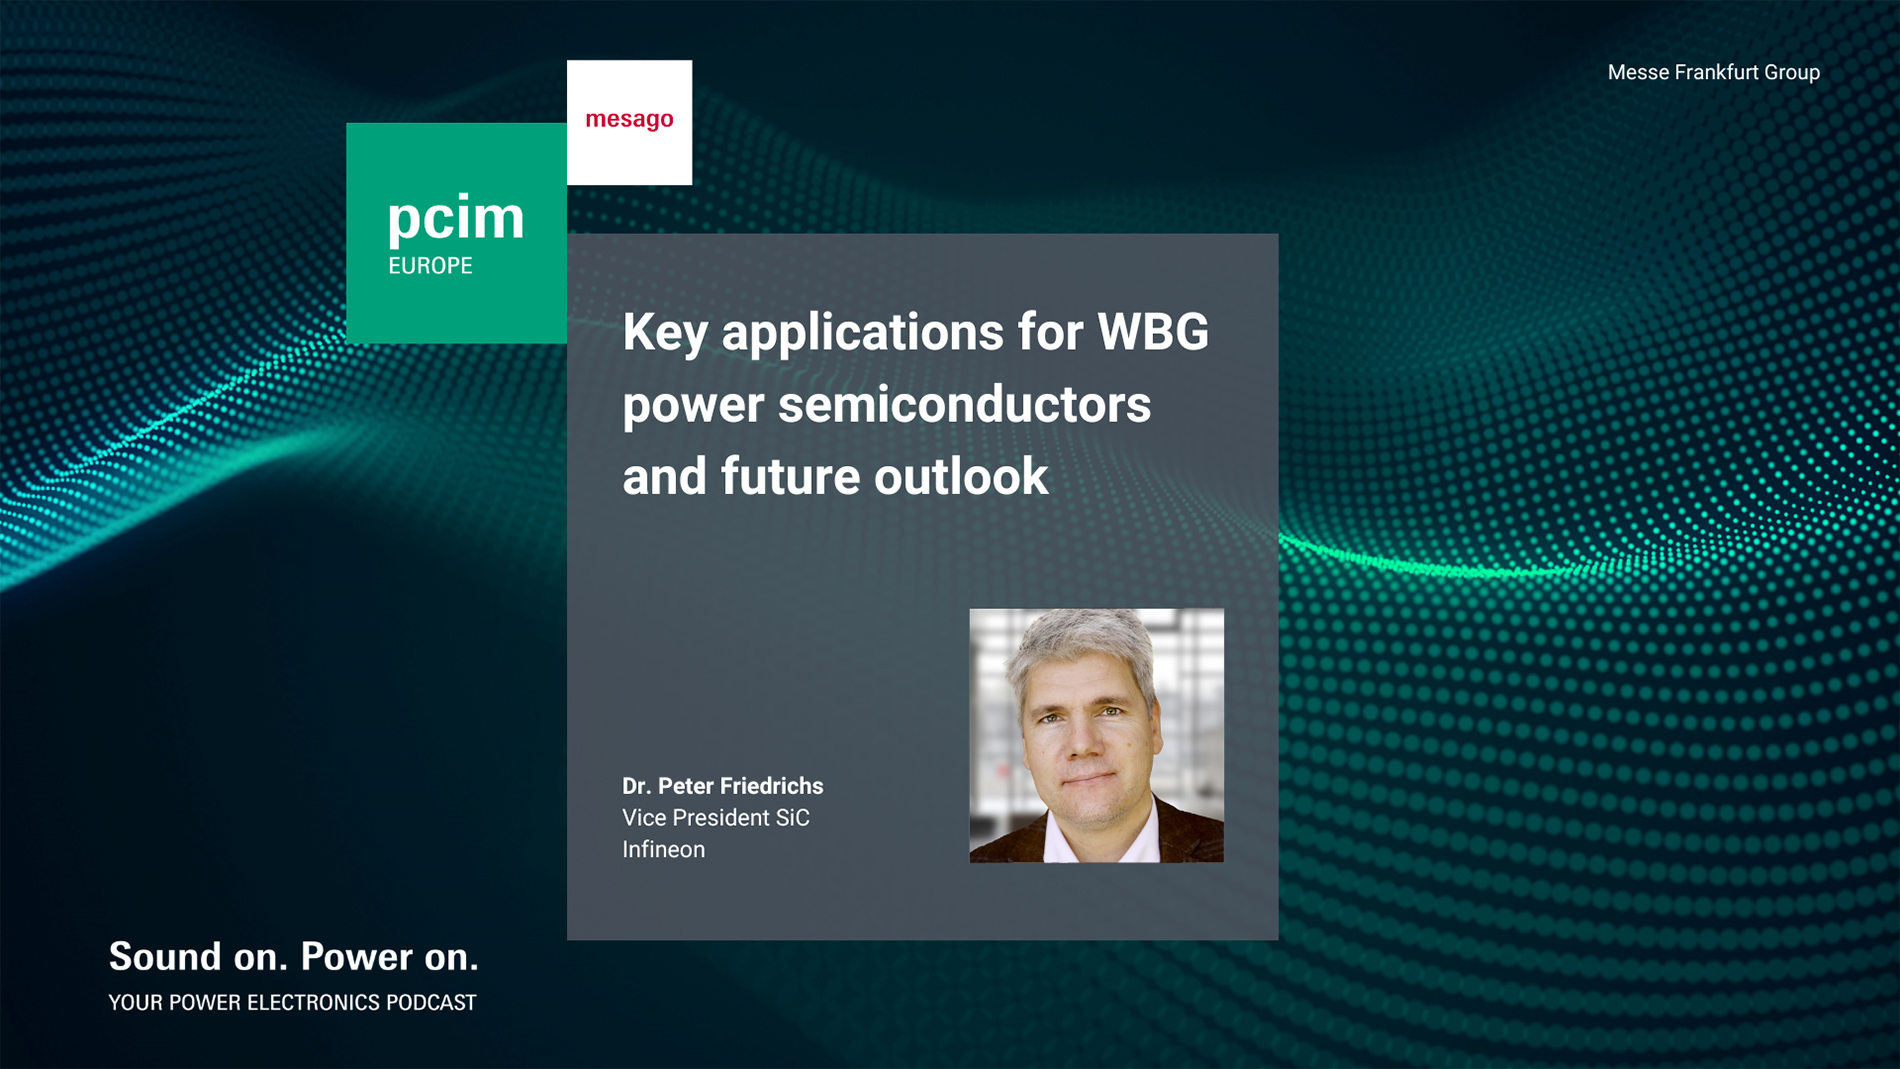 Dr. Peter Friedrichs from Infineon on the key applications for WBG power semicondutors